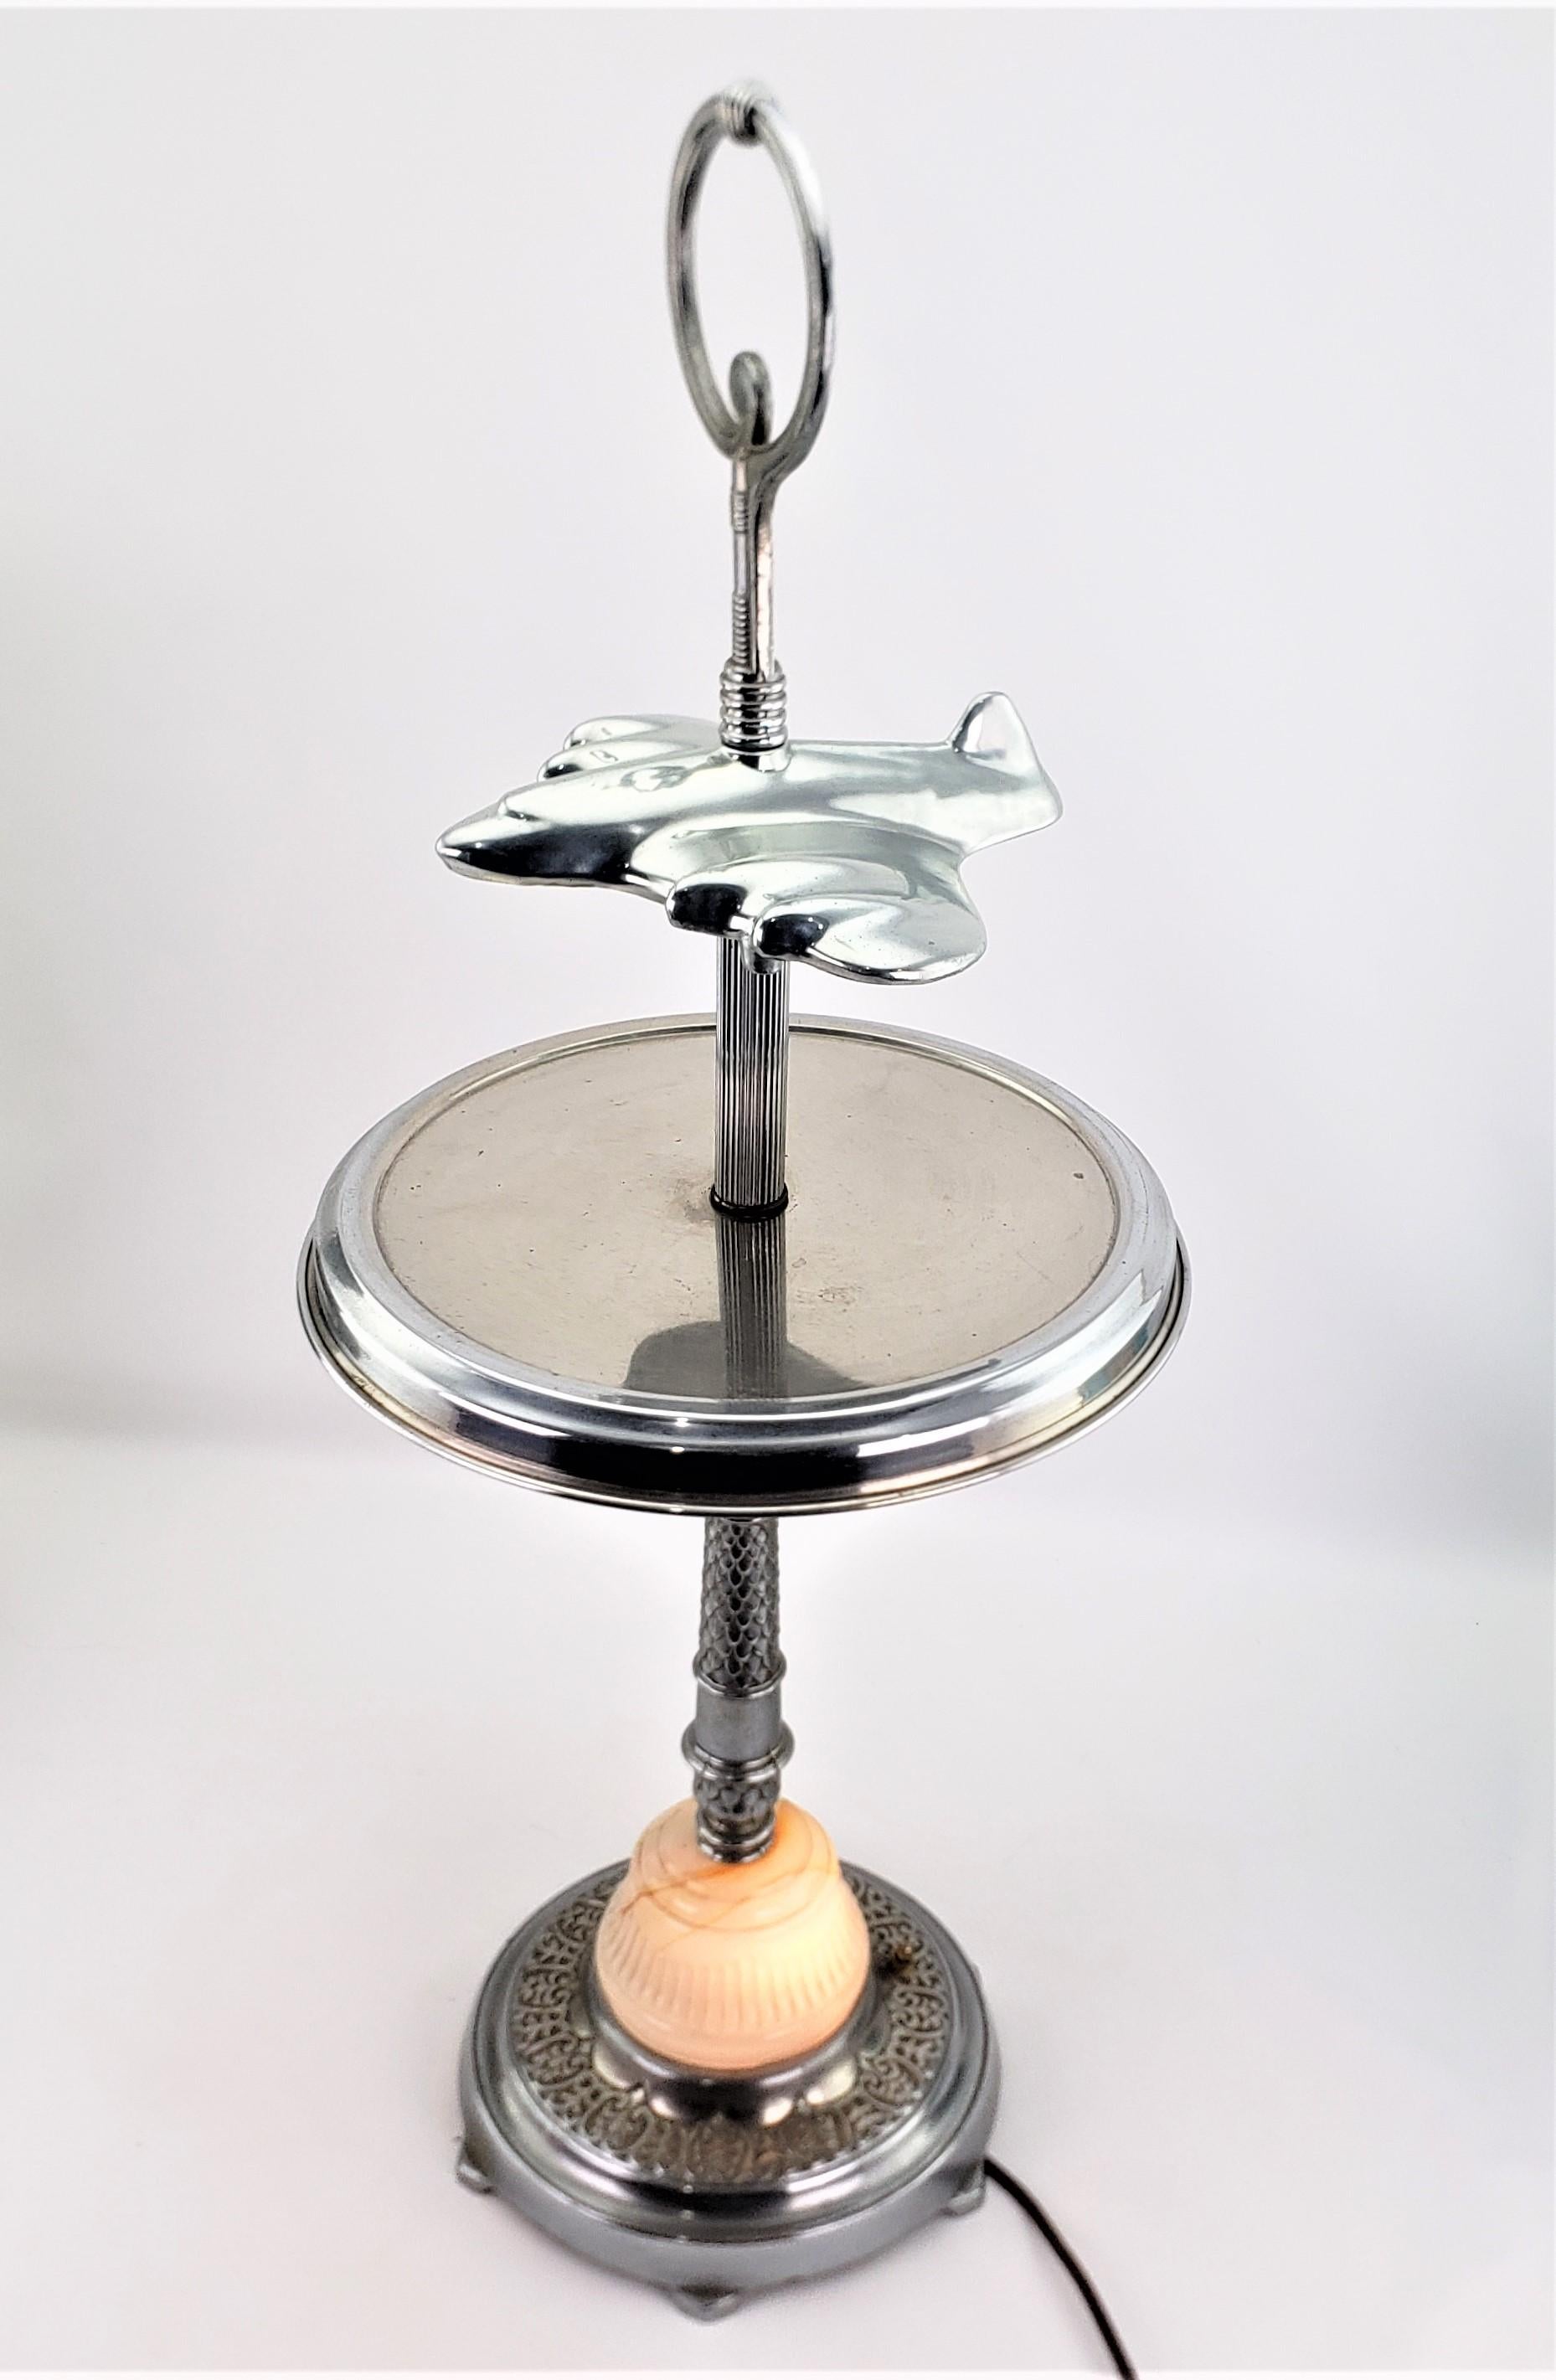 Unique Art Deco Styled Chrome Jet Airplane Lighted Smoker's Stand or Table For Sale 7